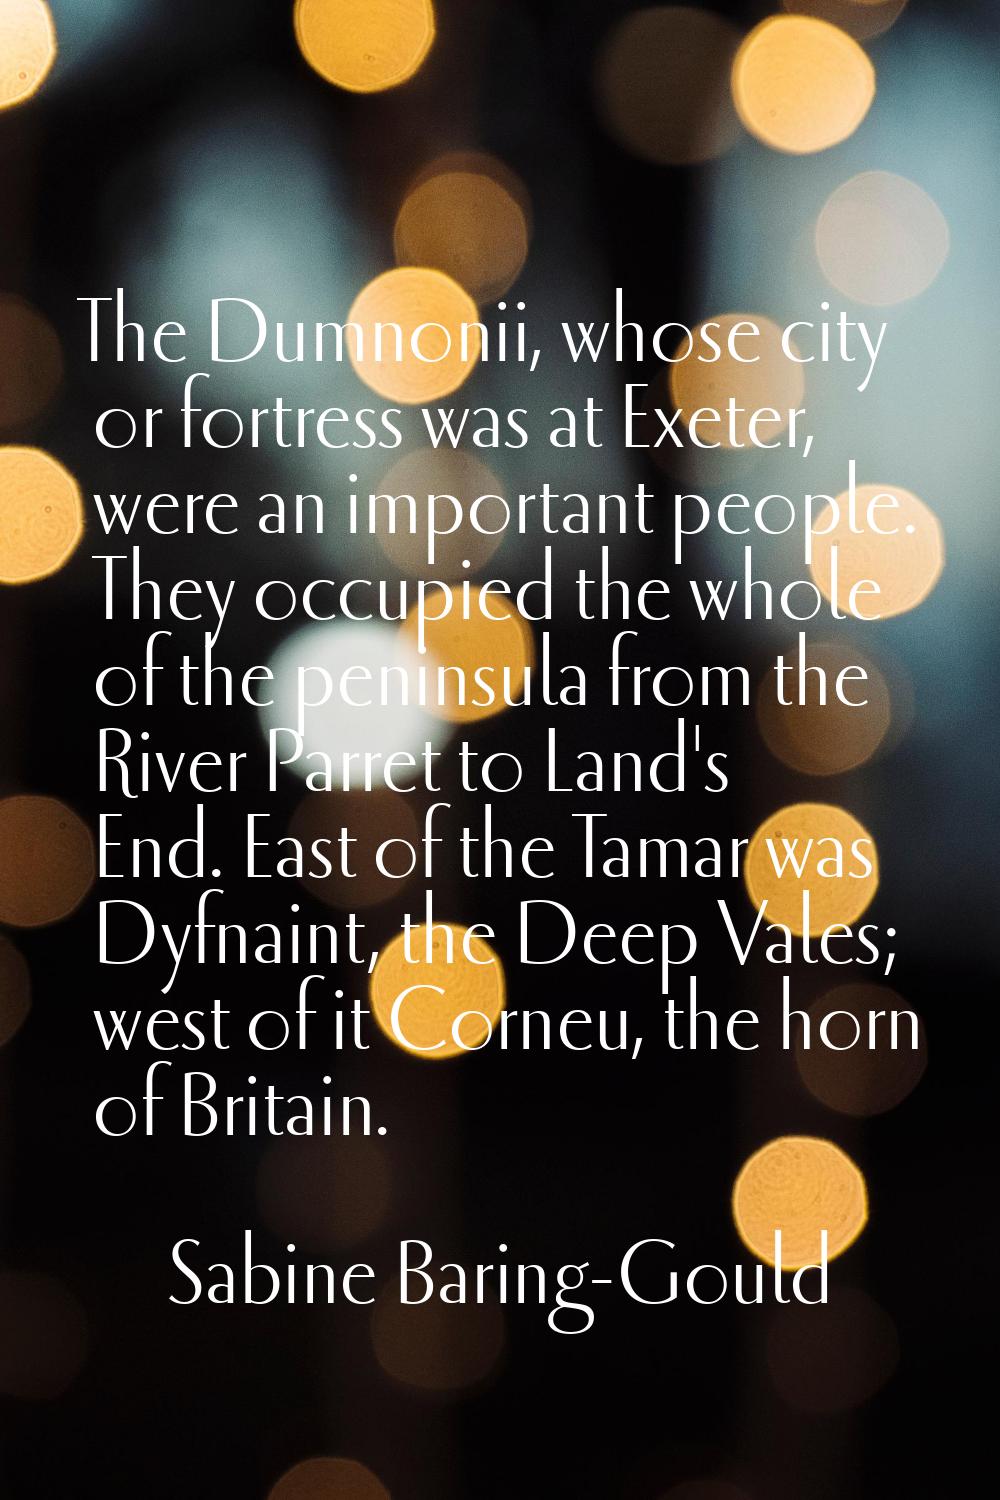 The Dumnonii, whose city or fortress was at Exeter, were an important people. They occupied the who